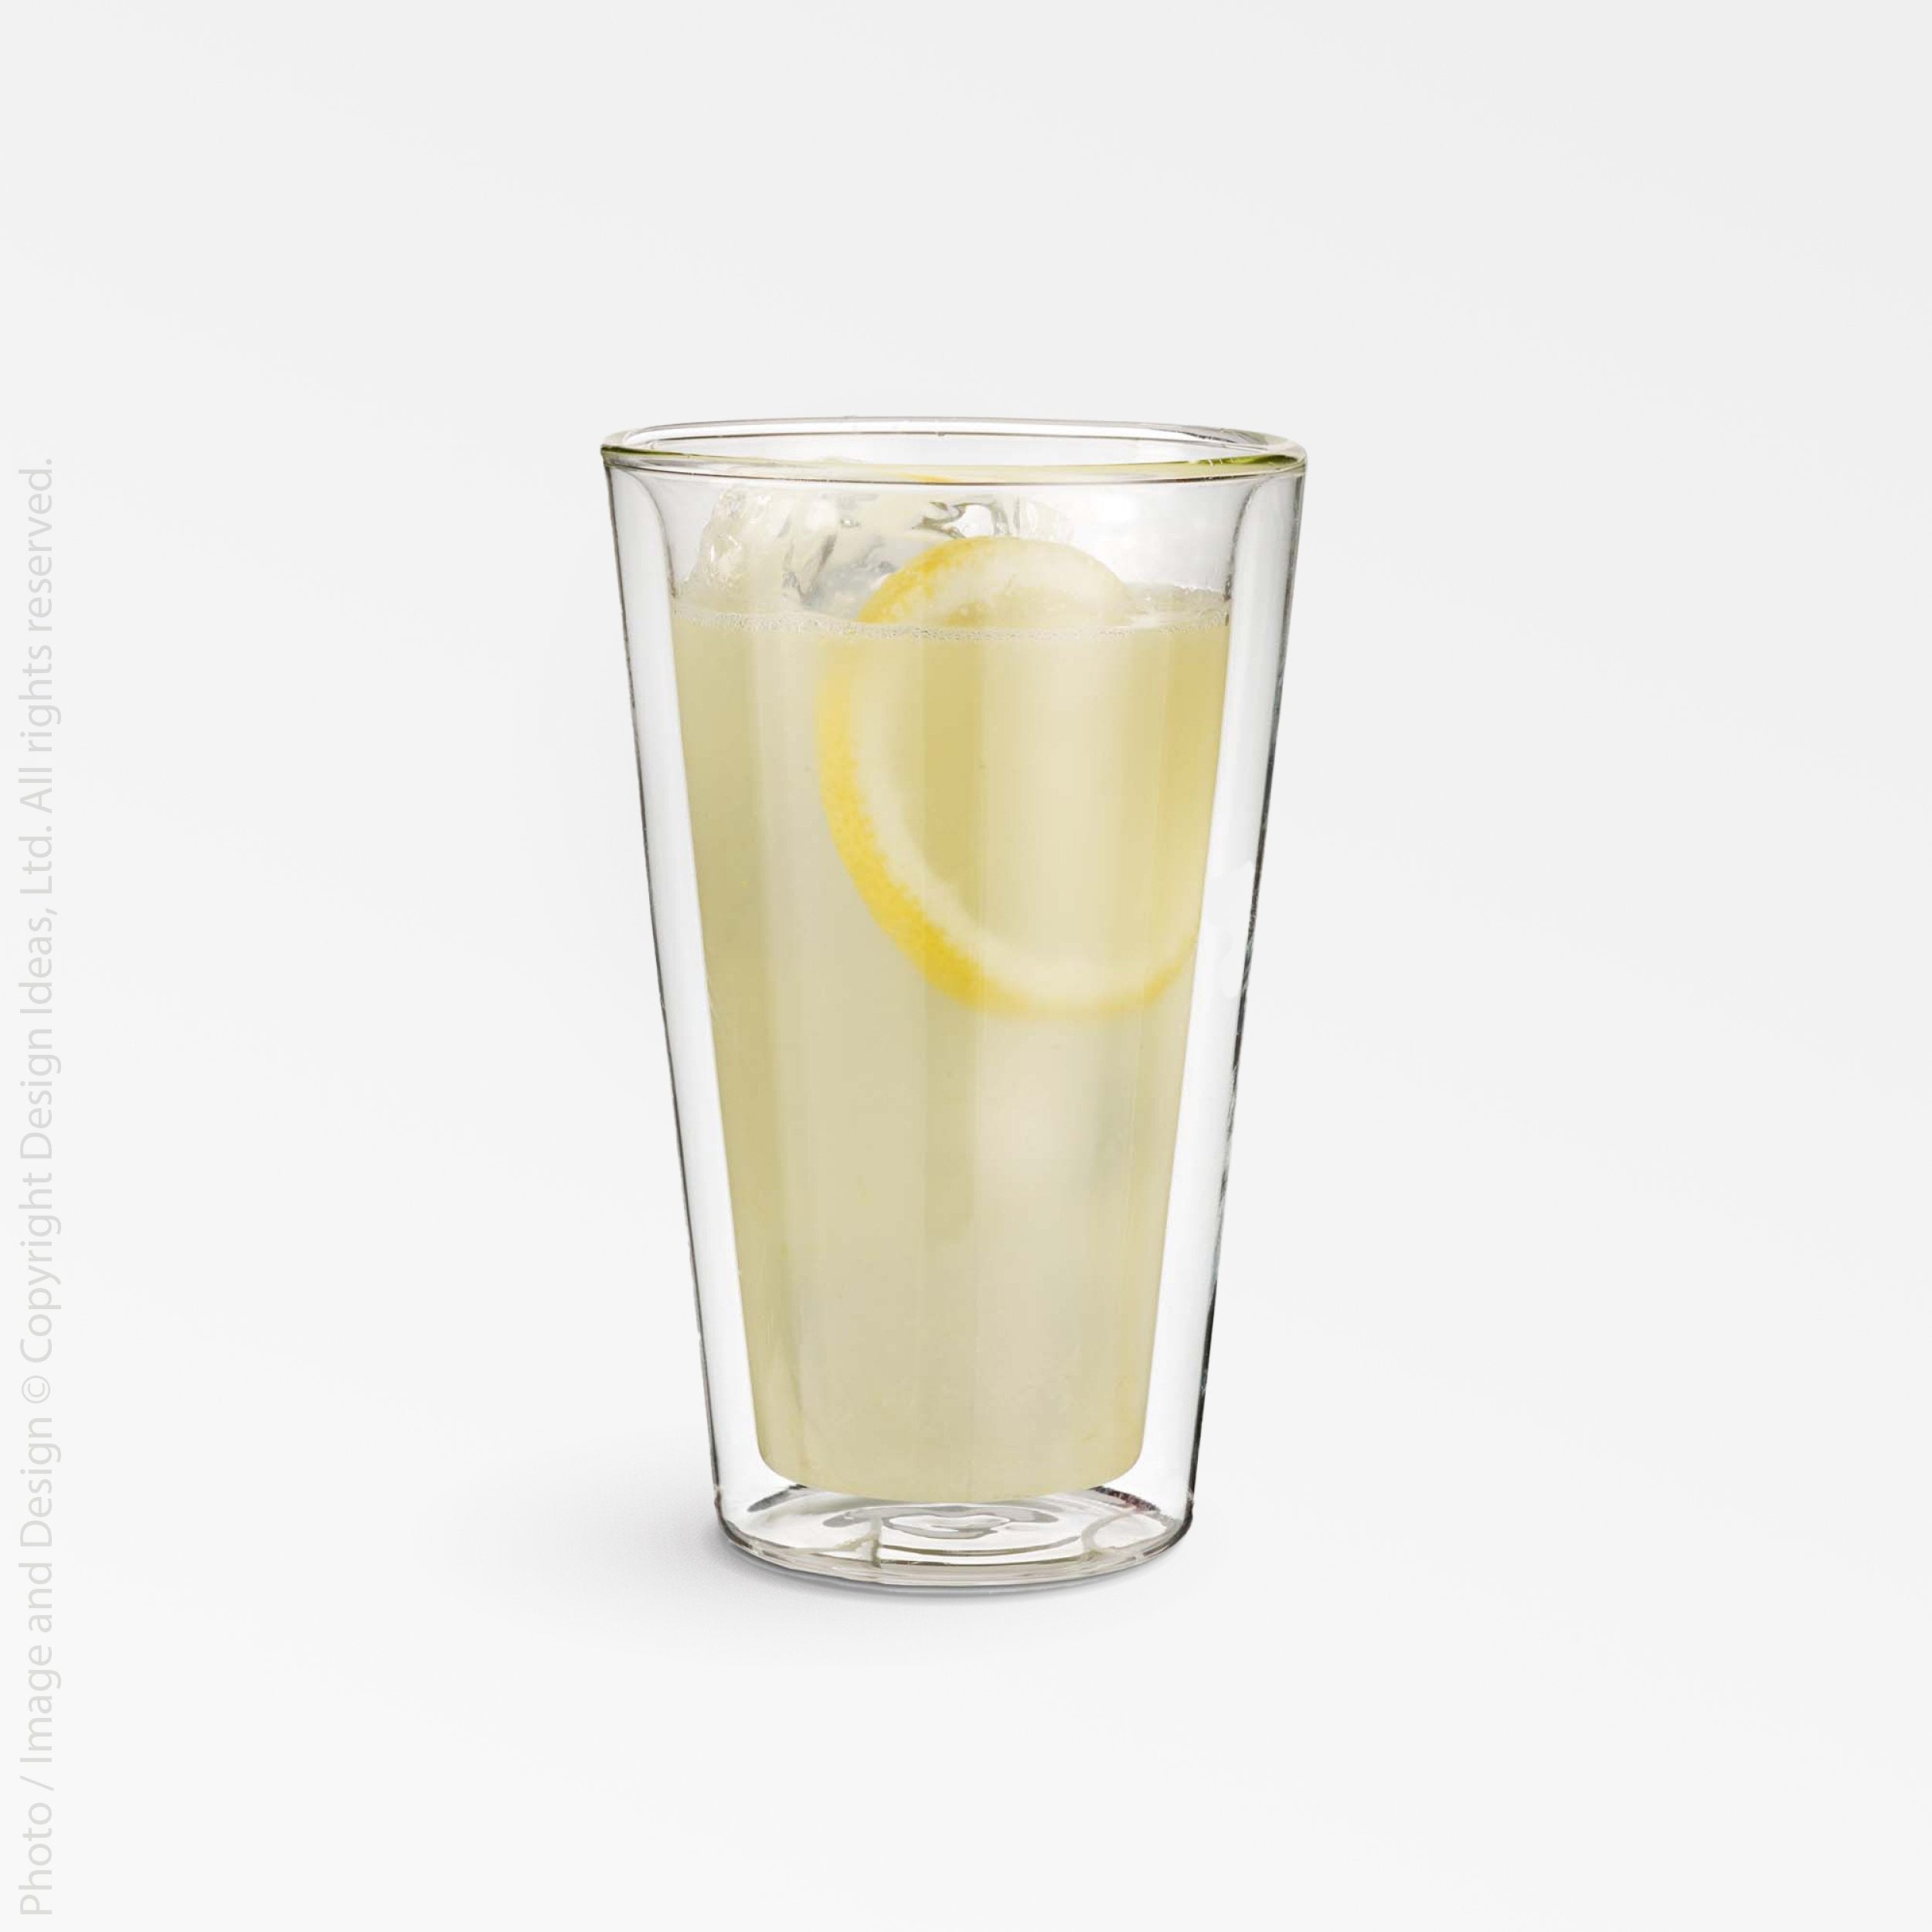 Lexington Double Wall Pint Glass - white color | Image 1 | From the Lexington Collection | Elegantly constructed with natural glass for long lasting use | Available in clear color | texxture home